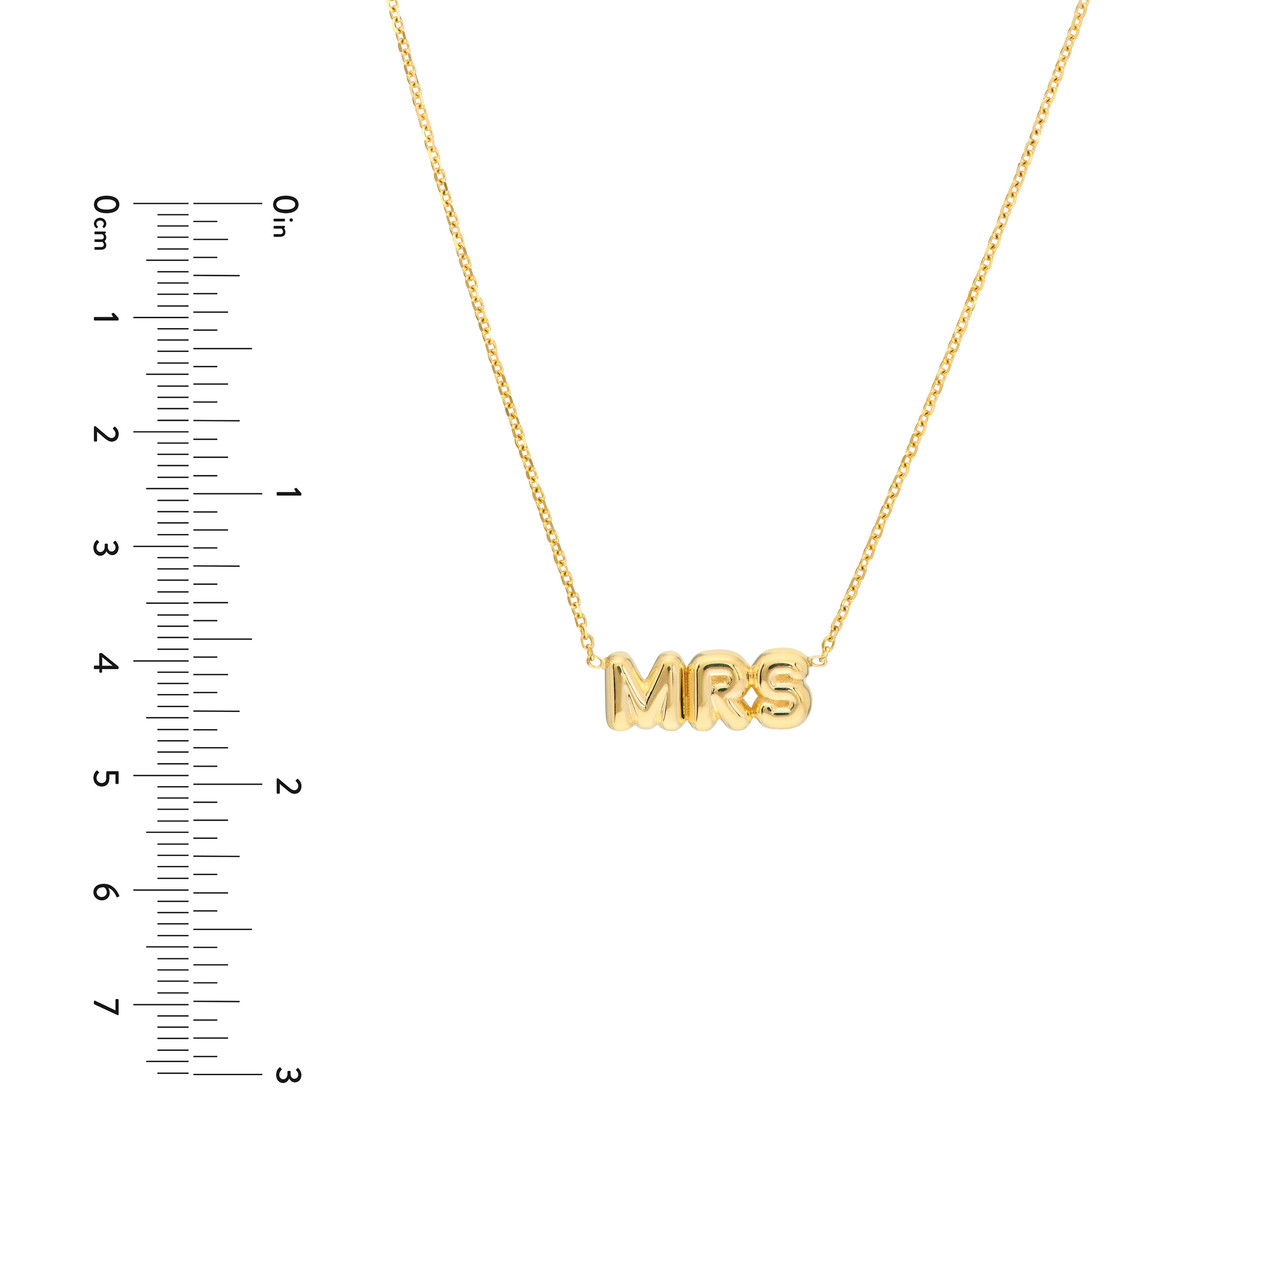 Puff Mrs Adjustable Necklace with Pear Shape Lock